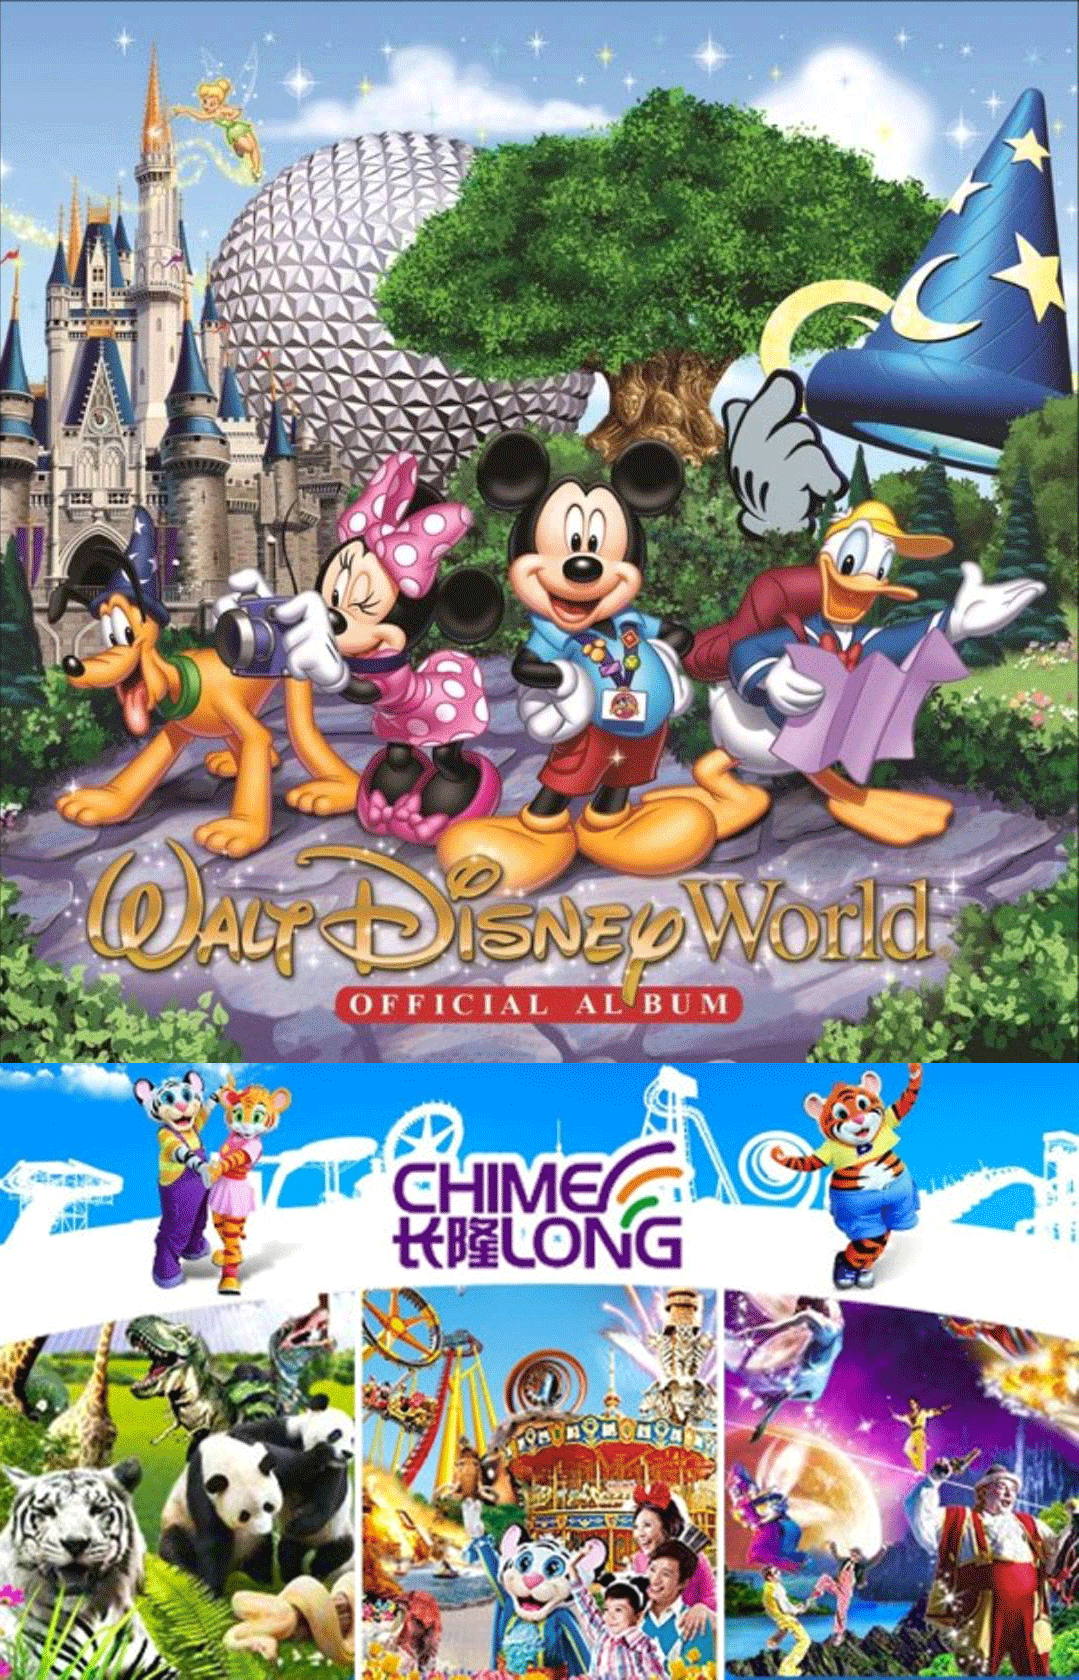 Disney and Chimelong